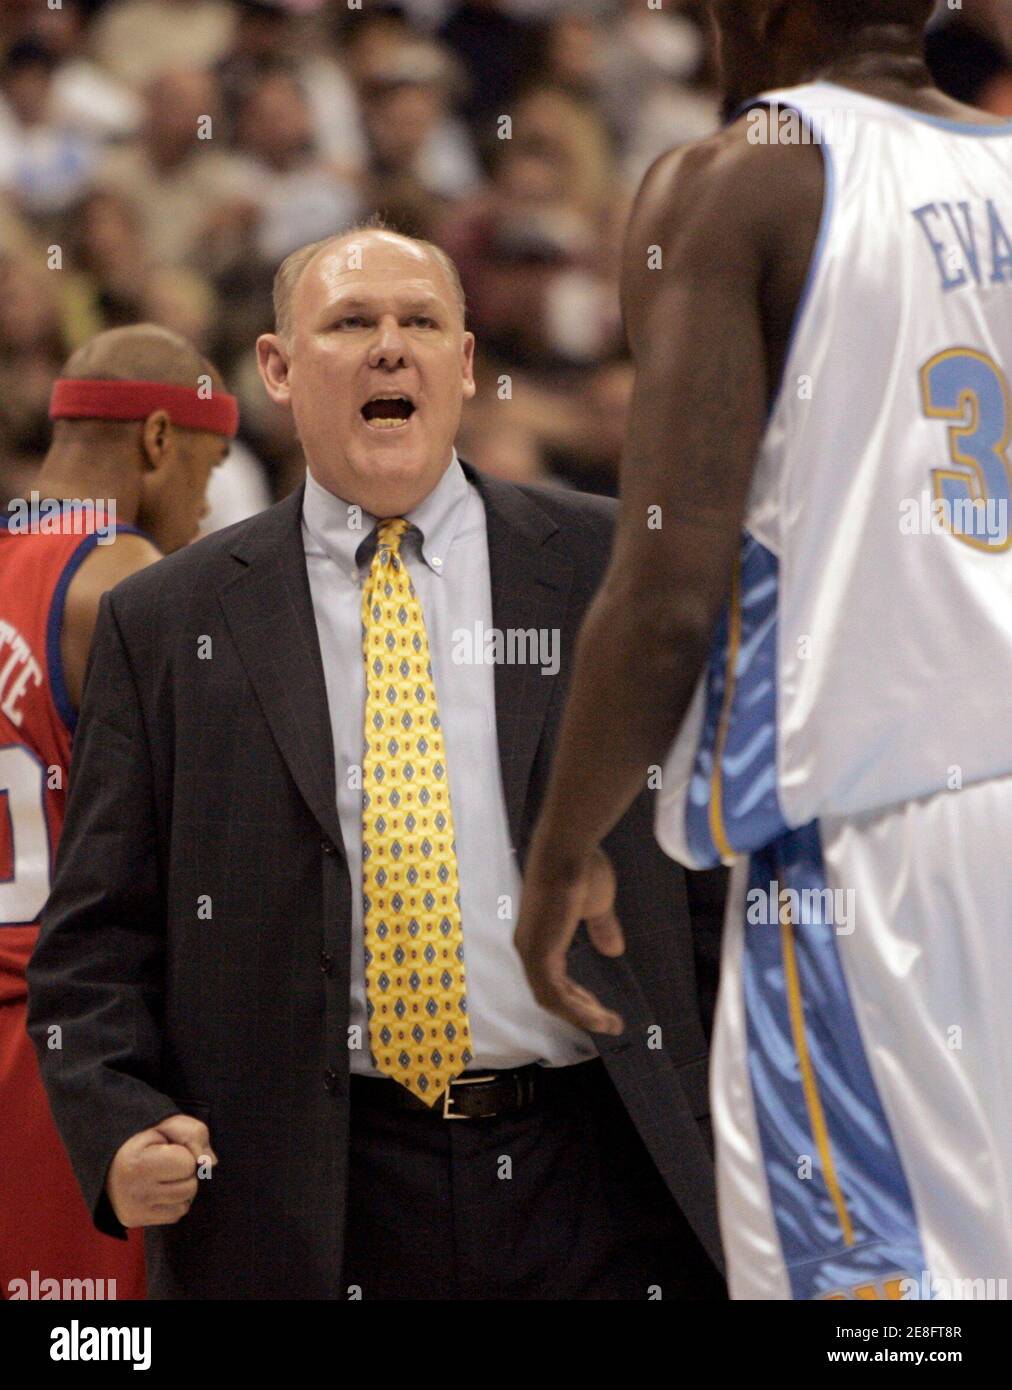 Denver Nuggets head coach George Karl (C) speaks to Nuggets forward Reggie Evans (R) in the third quarter of the Nuggets' 100-86 loss to the Los Angeles Clippers in game 4 of the NBA playoff series in Denver April 29, 2006. The Clippers lead the series 3-1. REUTERS/Rick Wilking Stock Photo